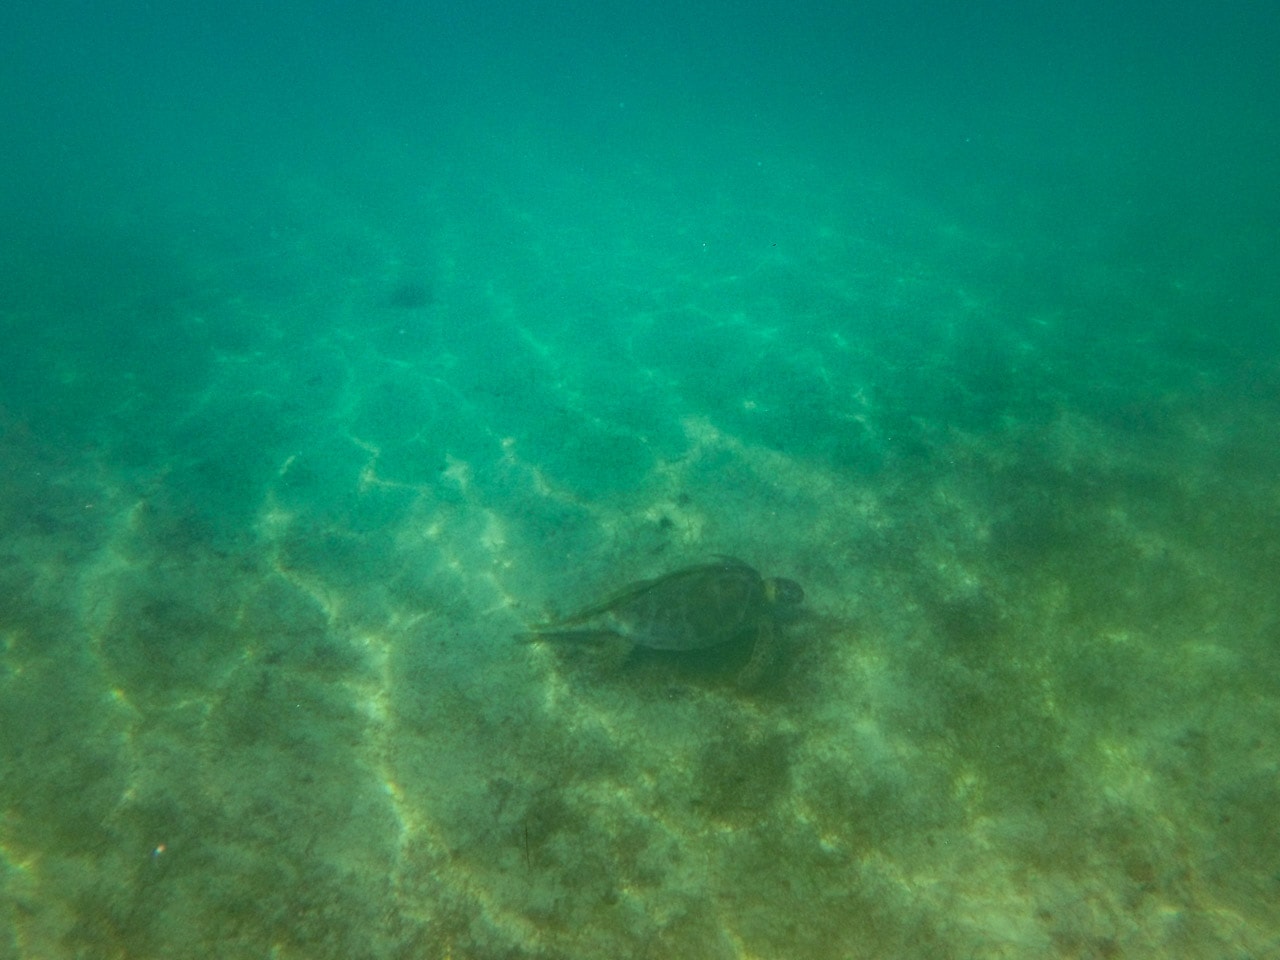 Green turtle with remora in Francis Bay, seen while snorkeling in Virgin Islands National Park, St. John